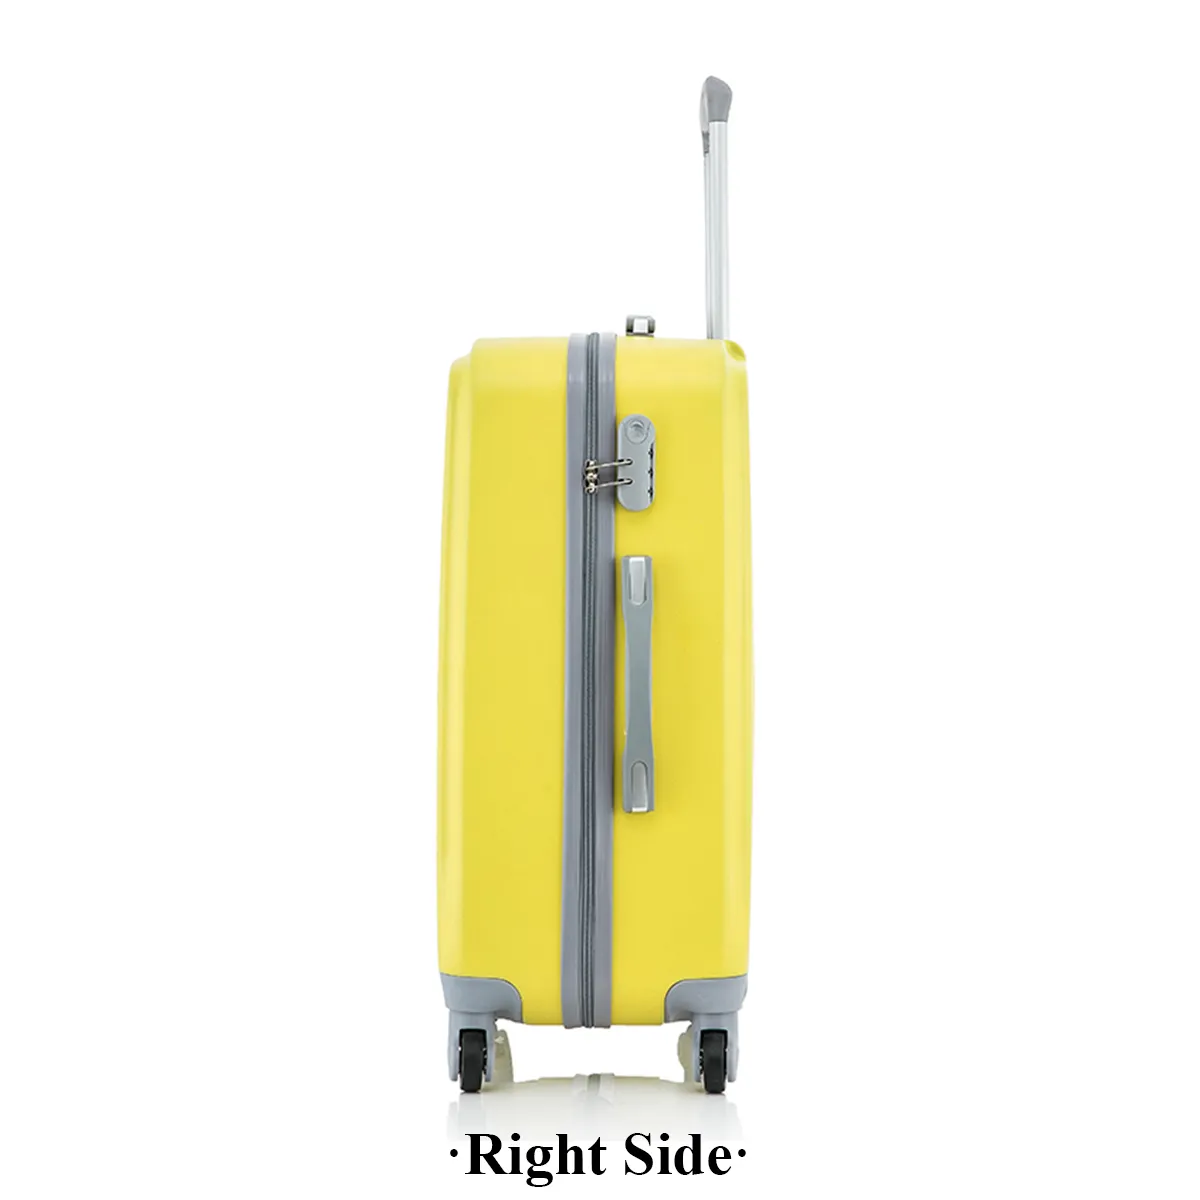 GOOD DESIGN CANDY COLOR FAST DURABLE ABS TRAVEL TROLLEY LUGGAGE SUITCASE